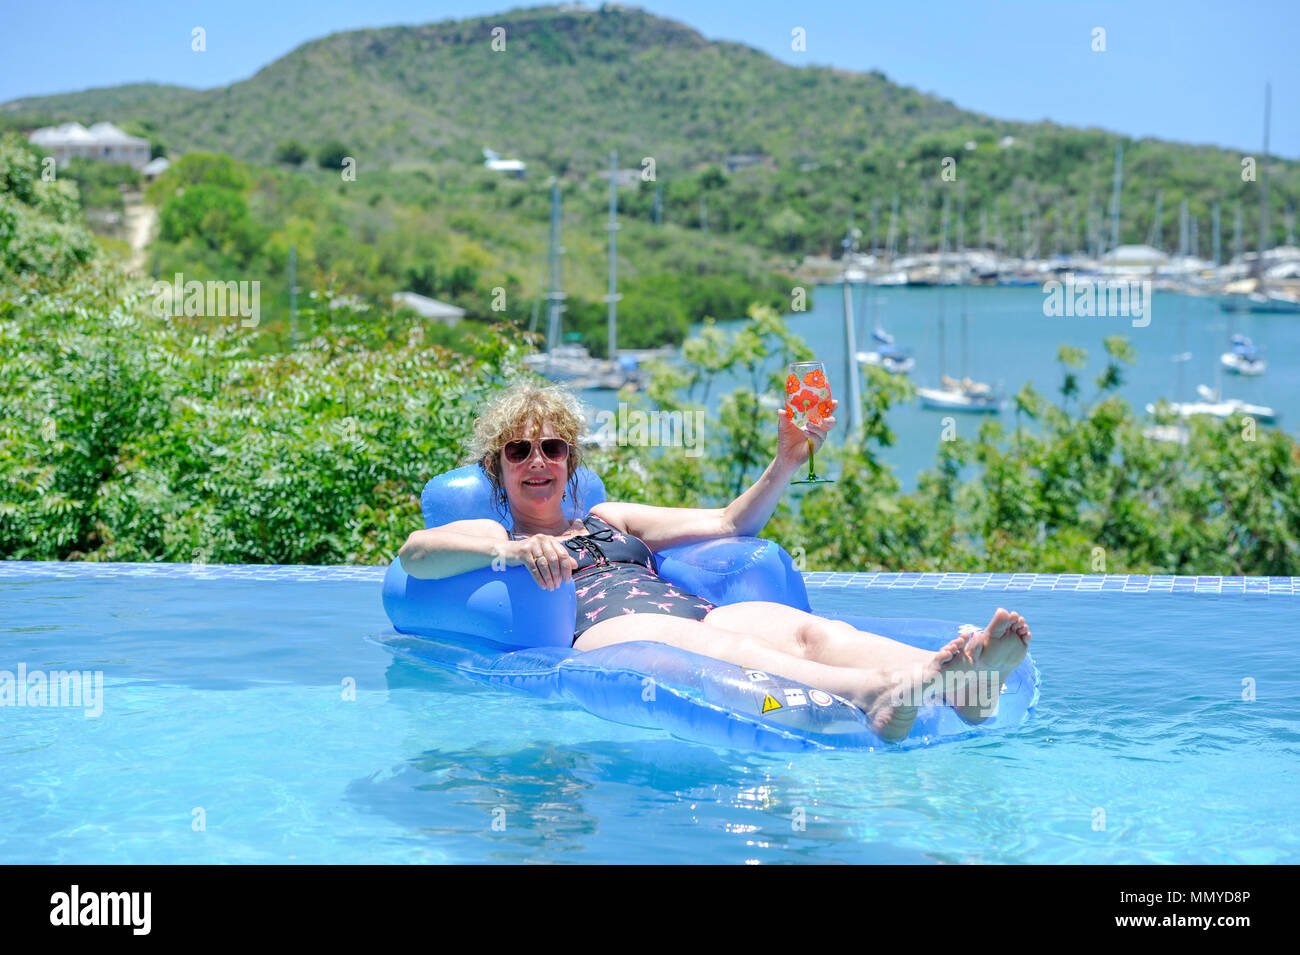 Antigua Lesser Antilles islands in the Caribbean West Indies - Woman on inflatable in an infinity swimming pool view overlooking English Harbour Stock Photo